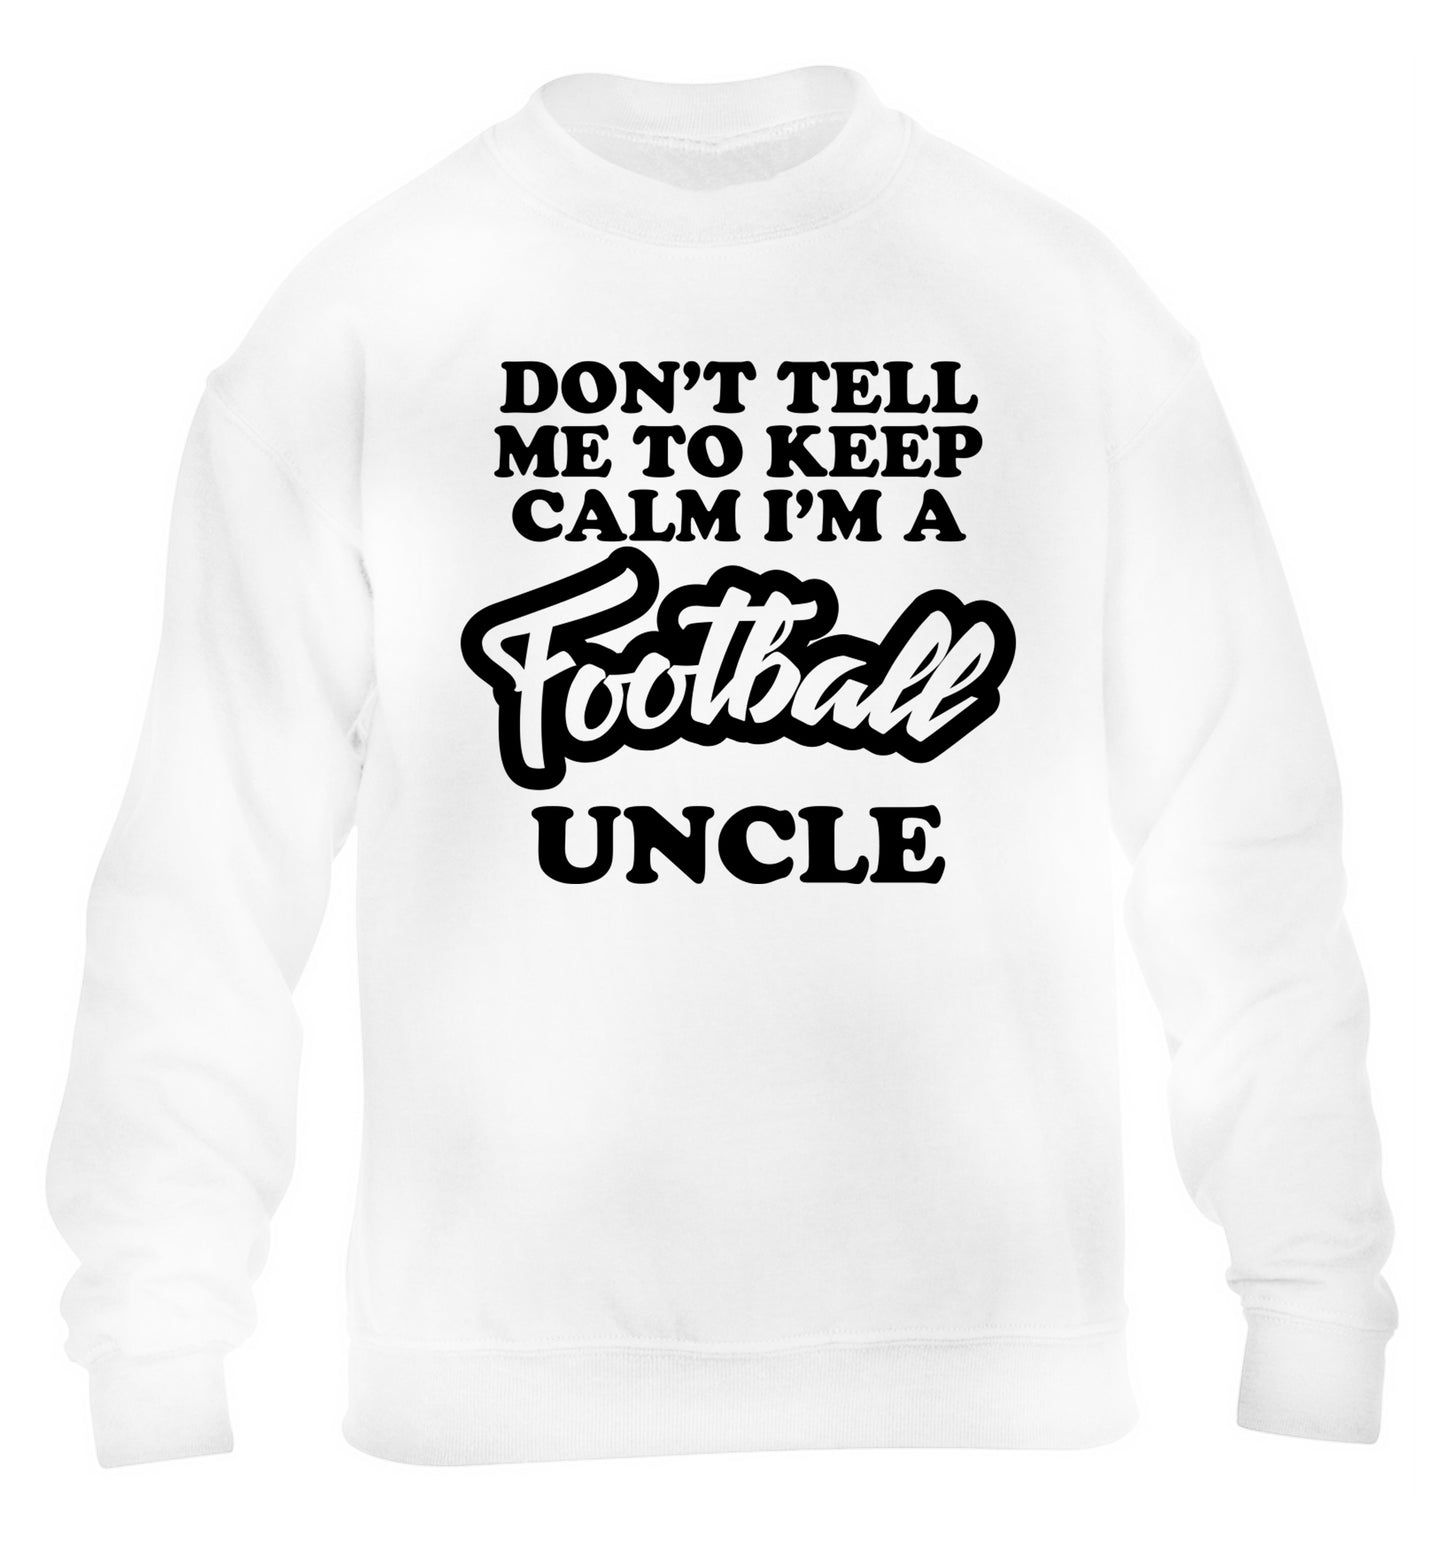 Don't tell me to keep calm I'm a football uncle children's white sweater 12-14 Years